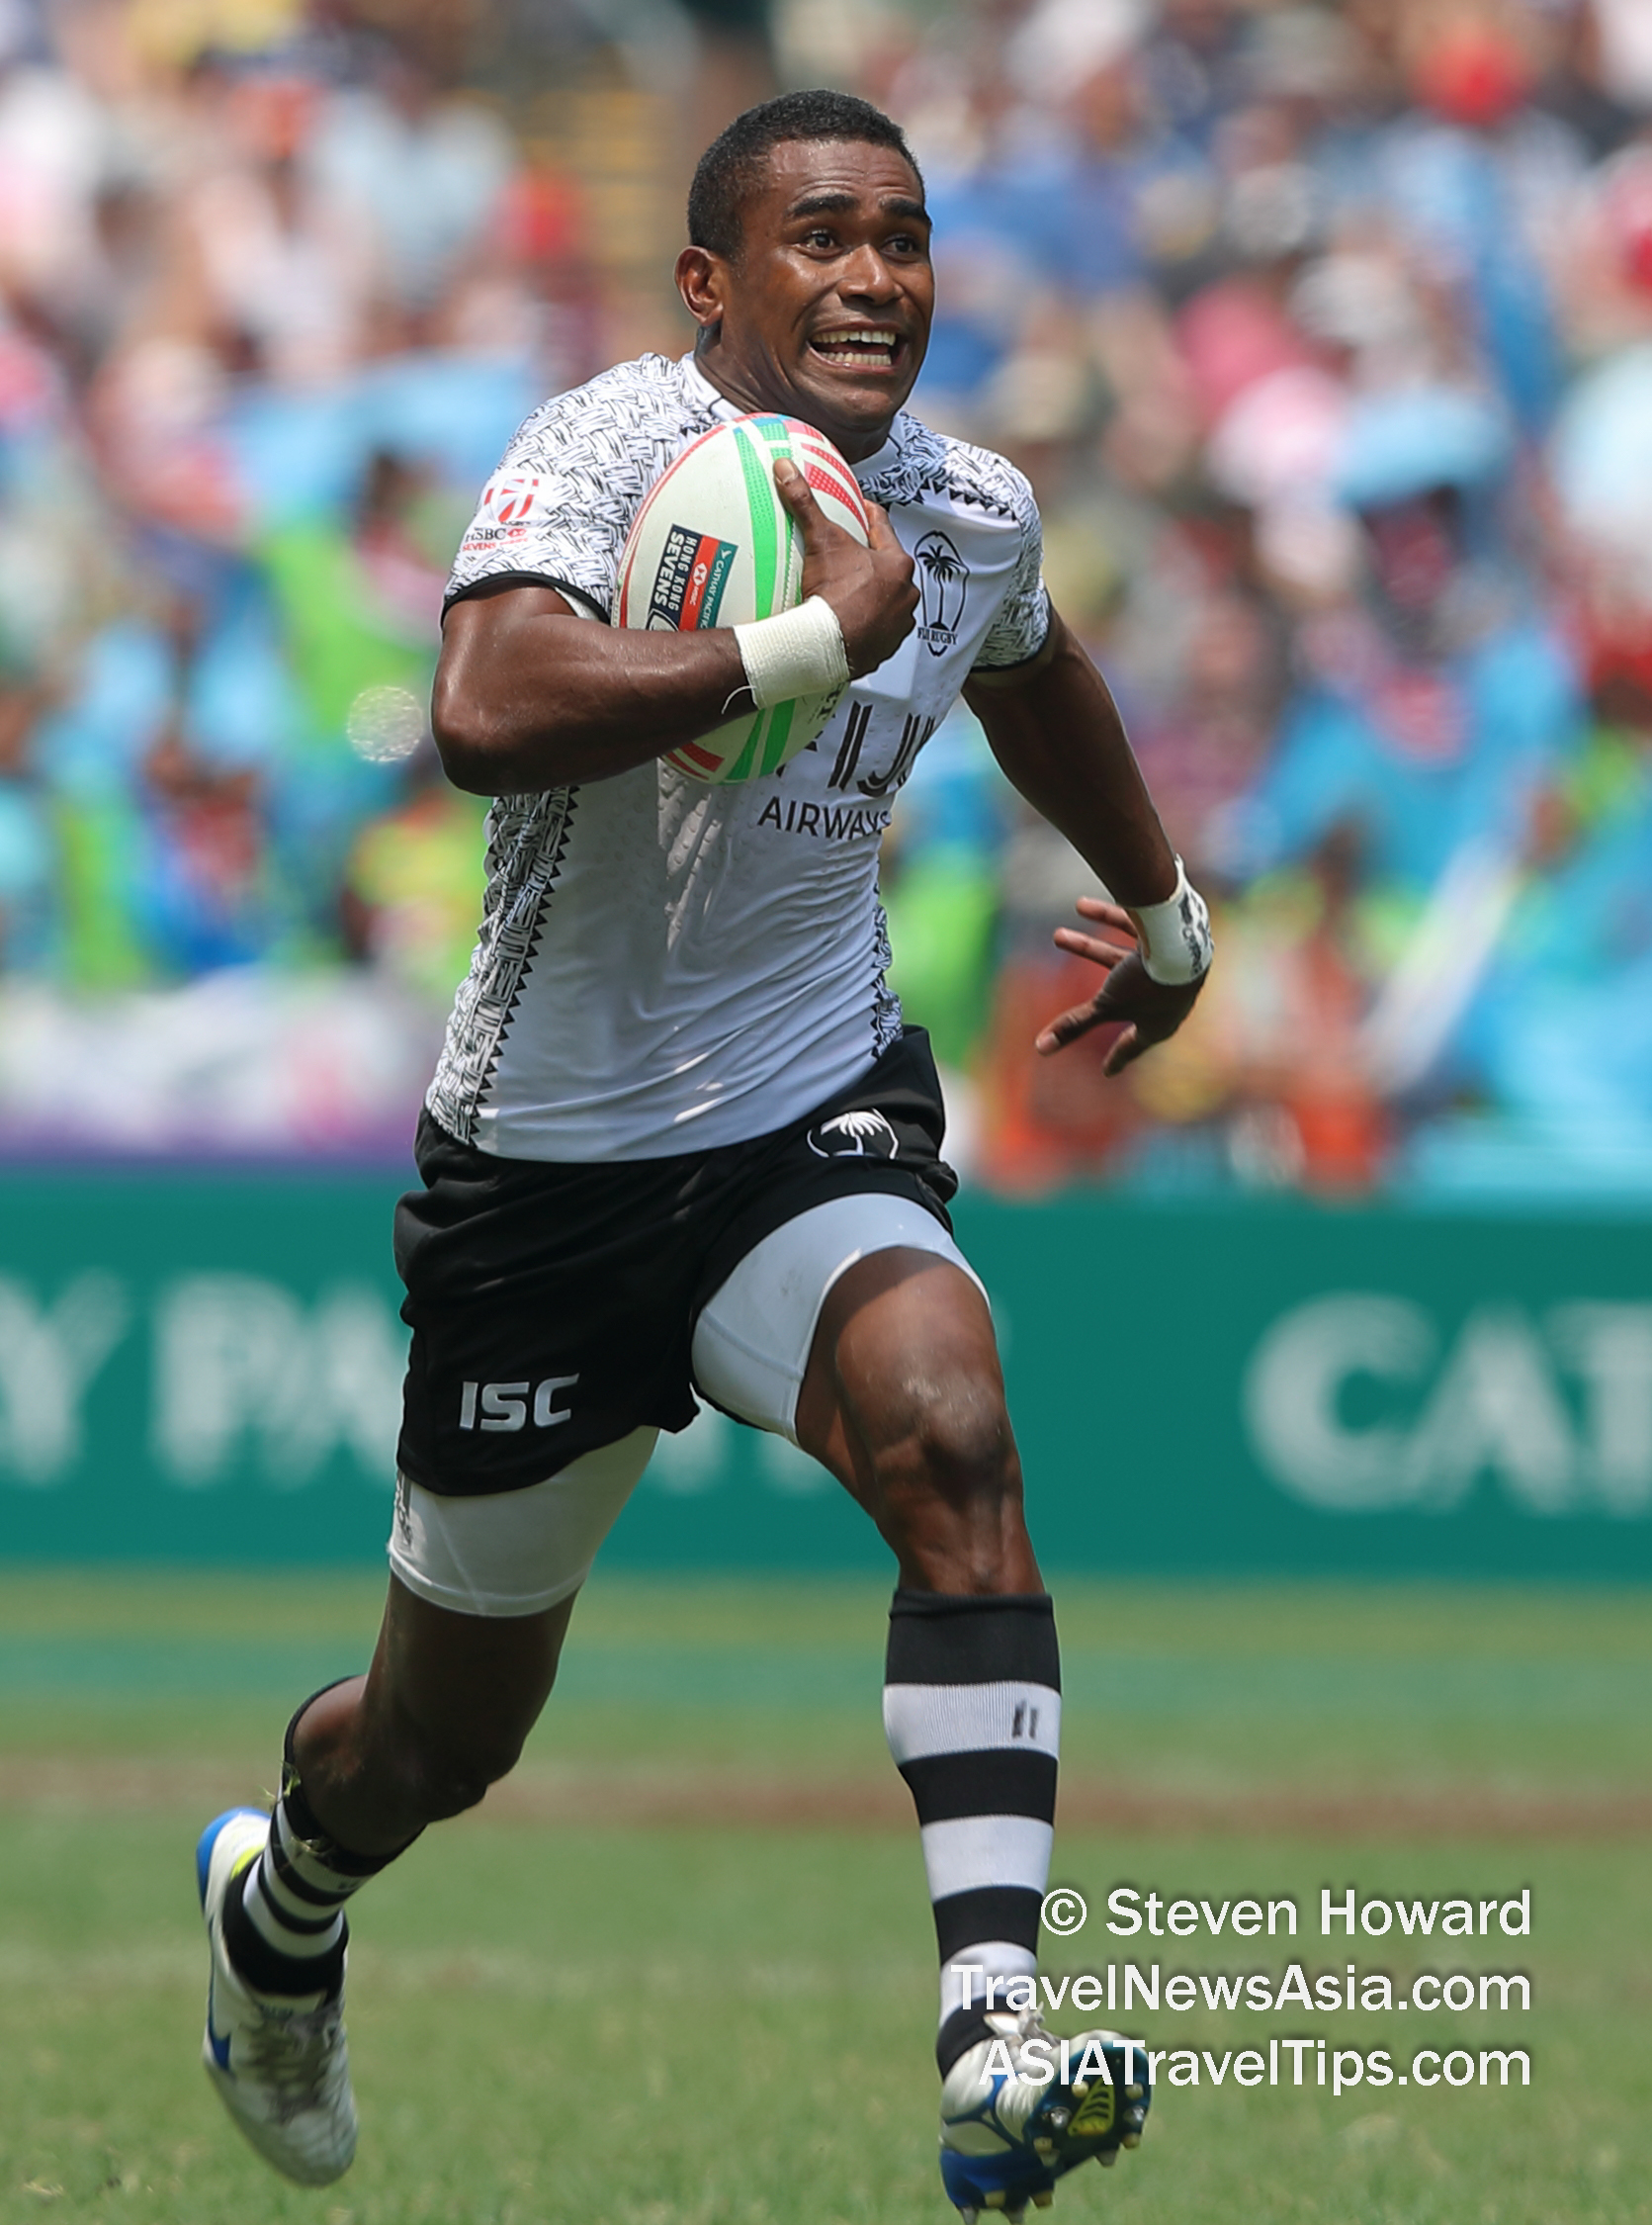 Fiji went into this last stop of the series in Paris already two points ahead of the USA, and marched on to cap their series-clinching day with the tournament victory after beating New Zealand 35-24 in the Cup Final. Picture from HK7s 2019 by Steven Howard of TravelNewsAsia.com Click to enlarge.